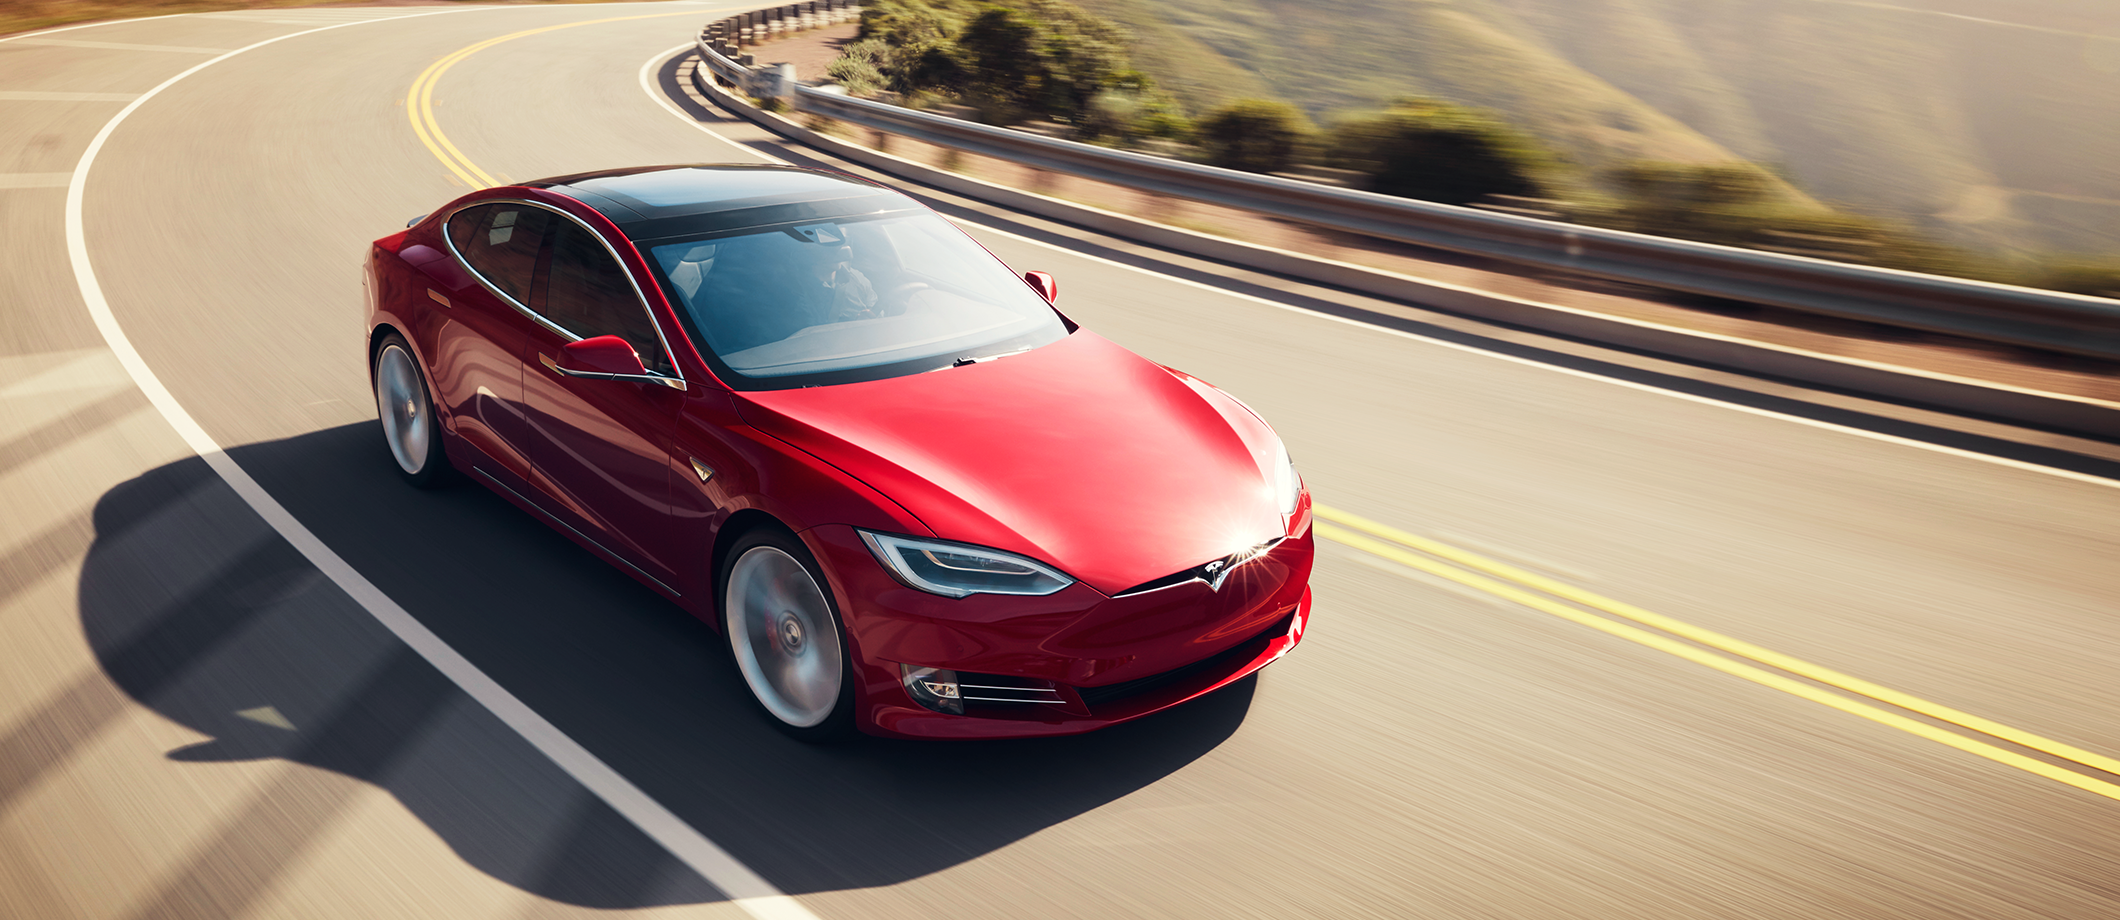 2021 Here's Why You Should and Shouldn't Buy a Tesla